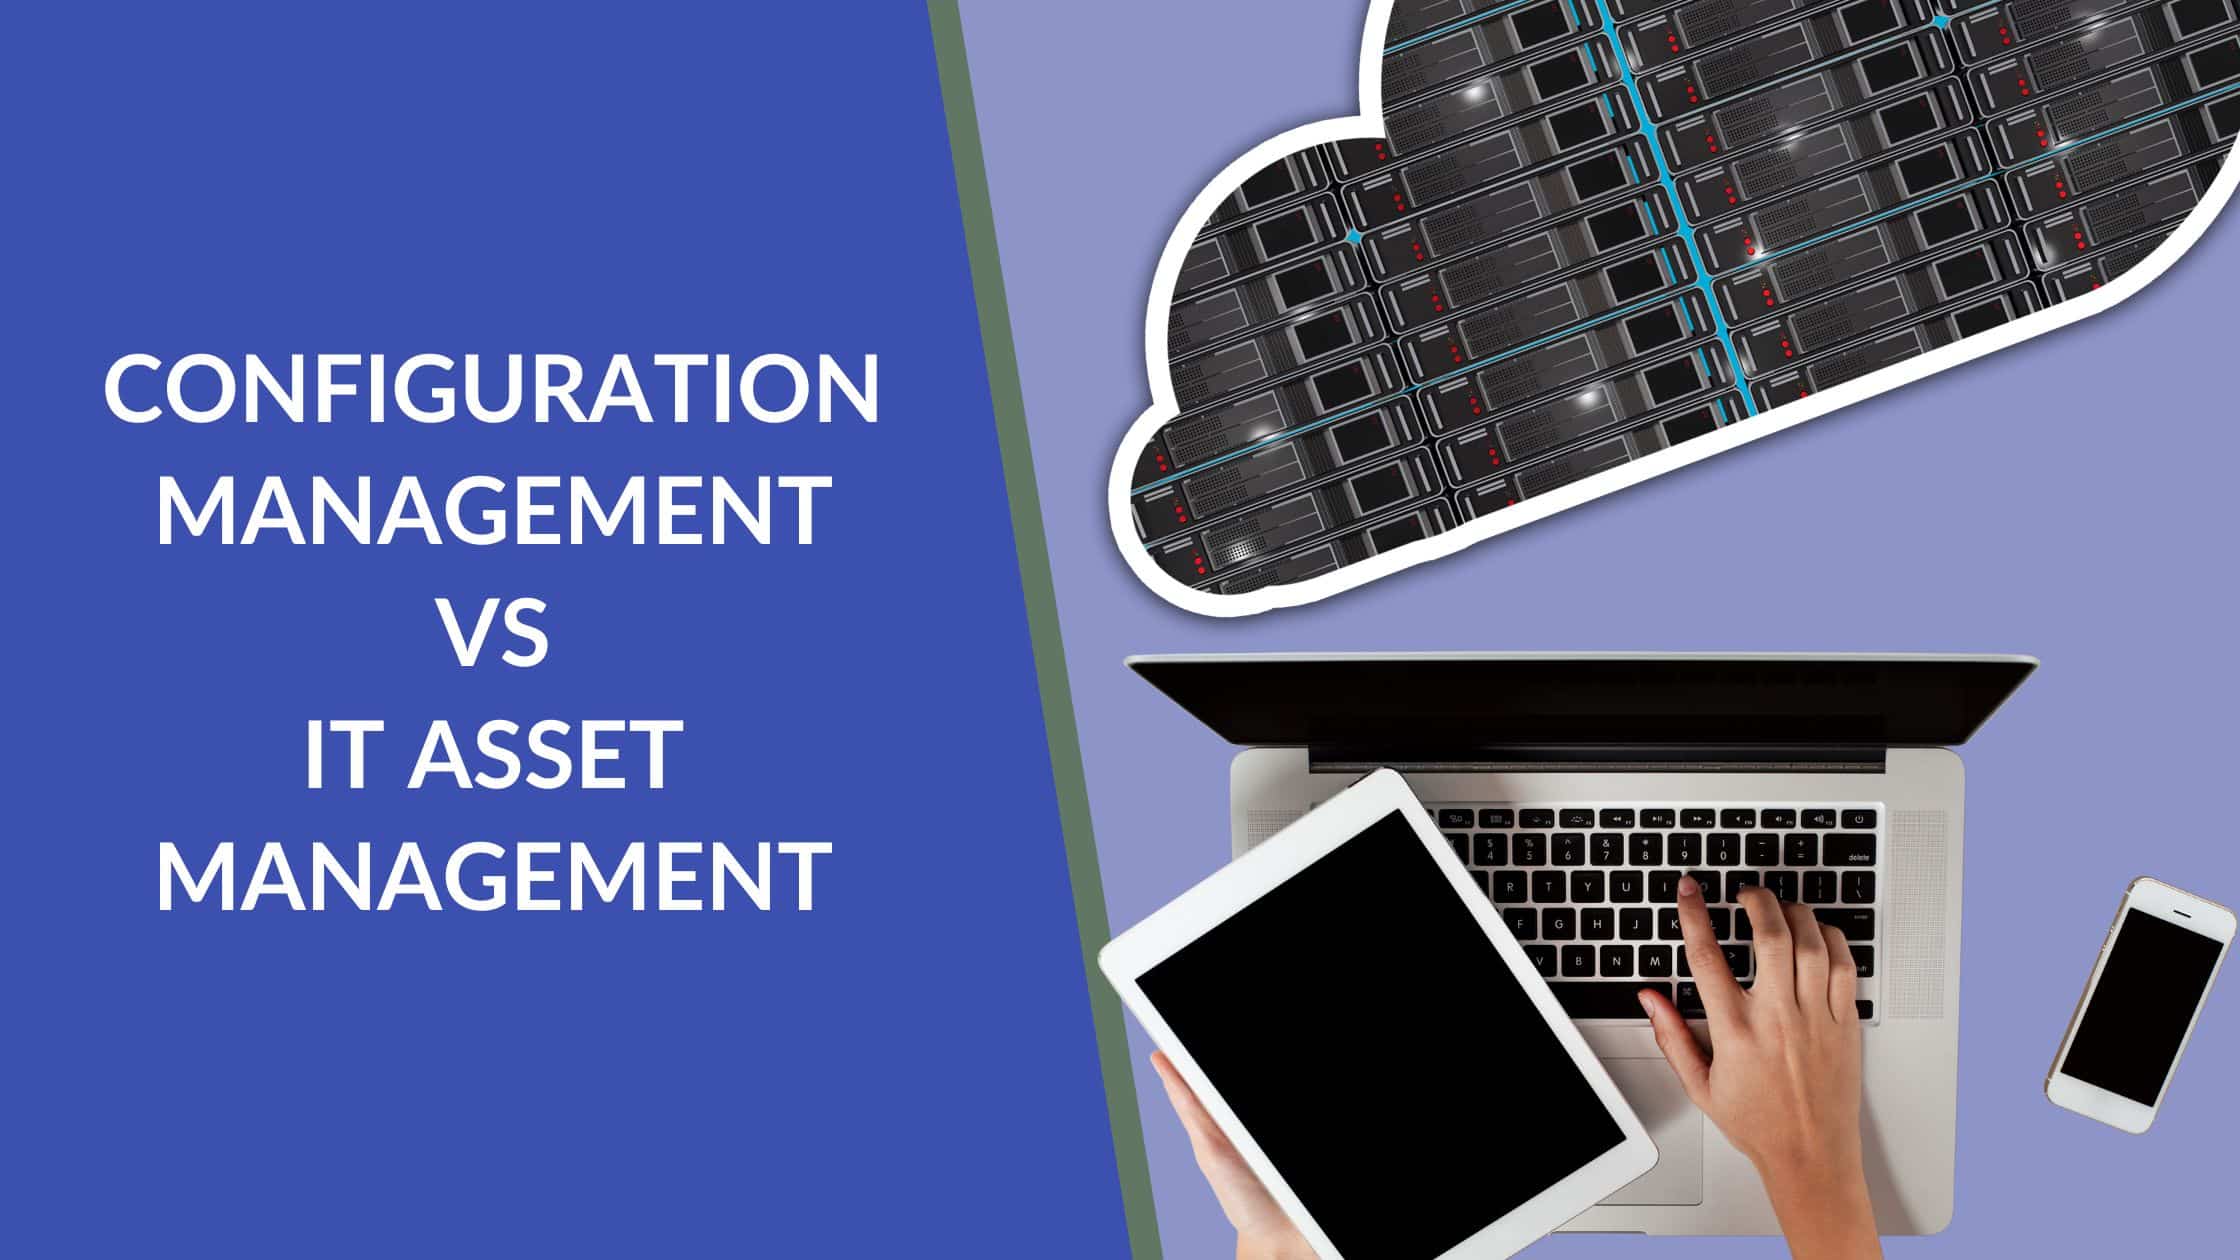 differences between configuration management and IT asset management